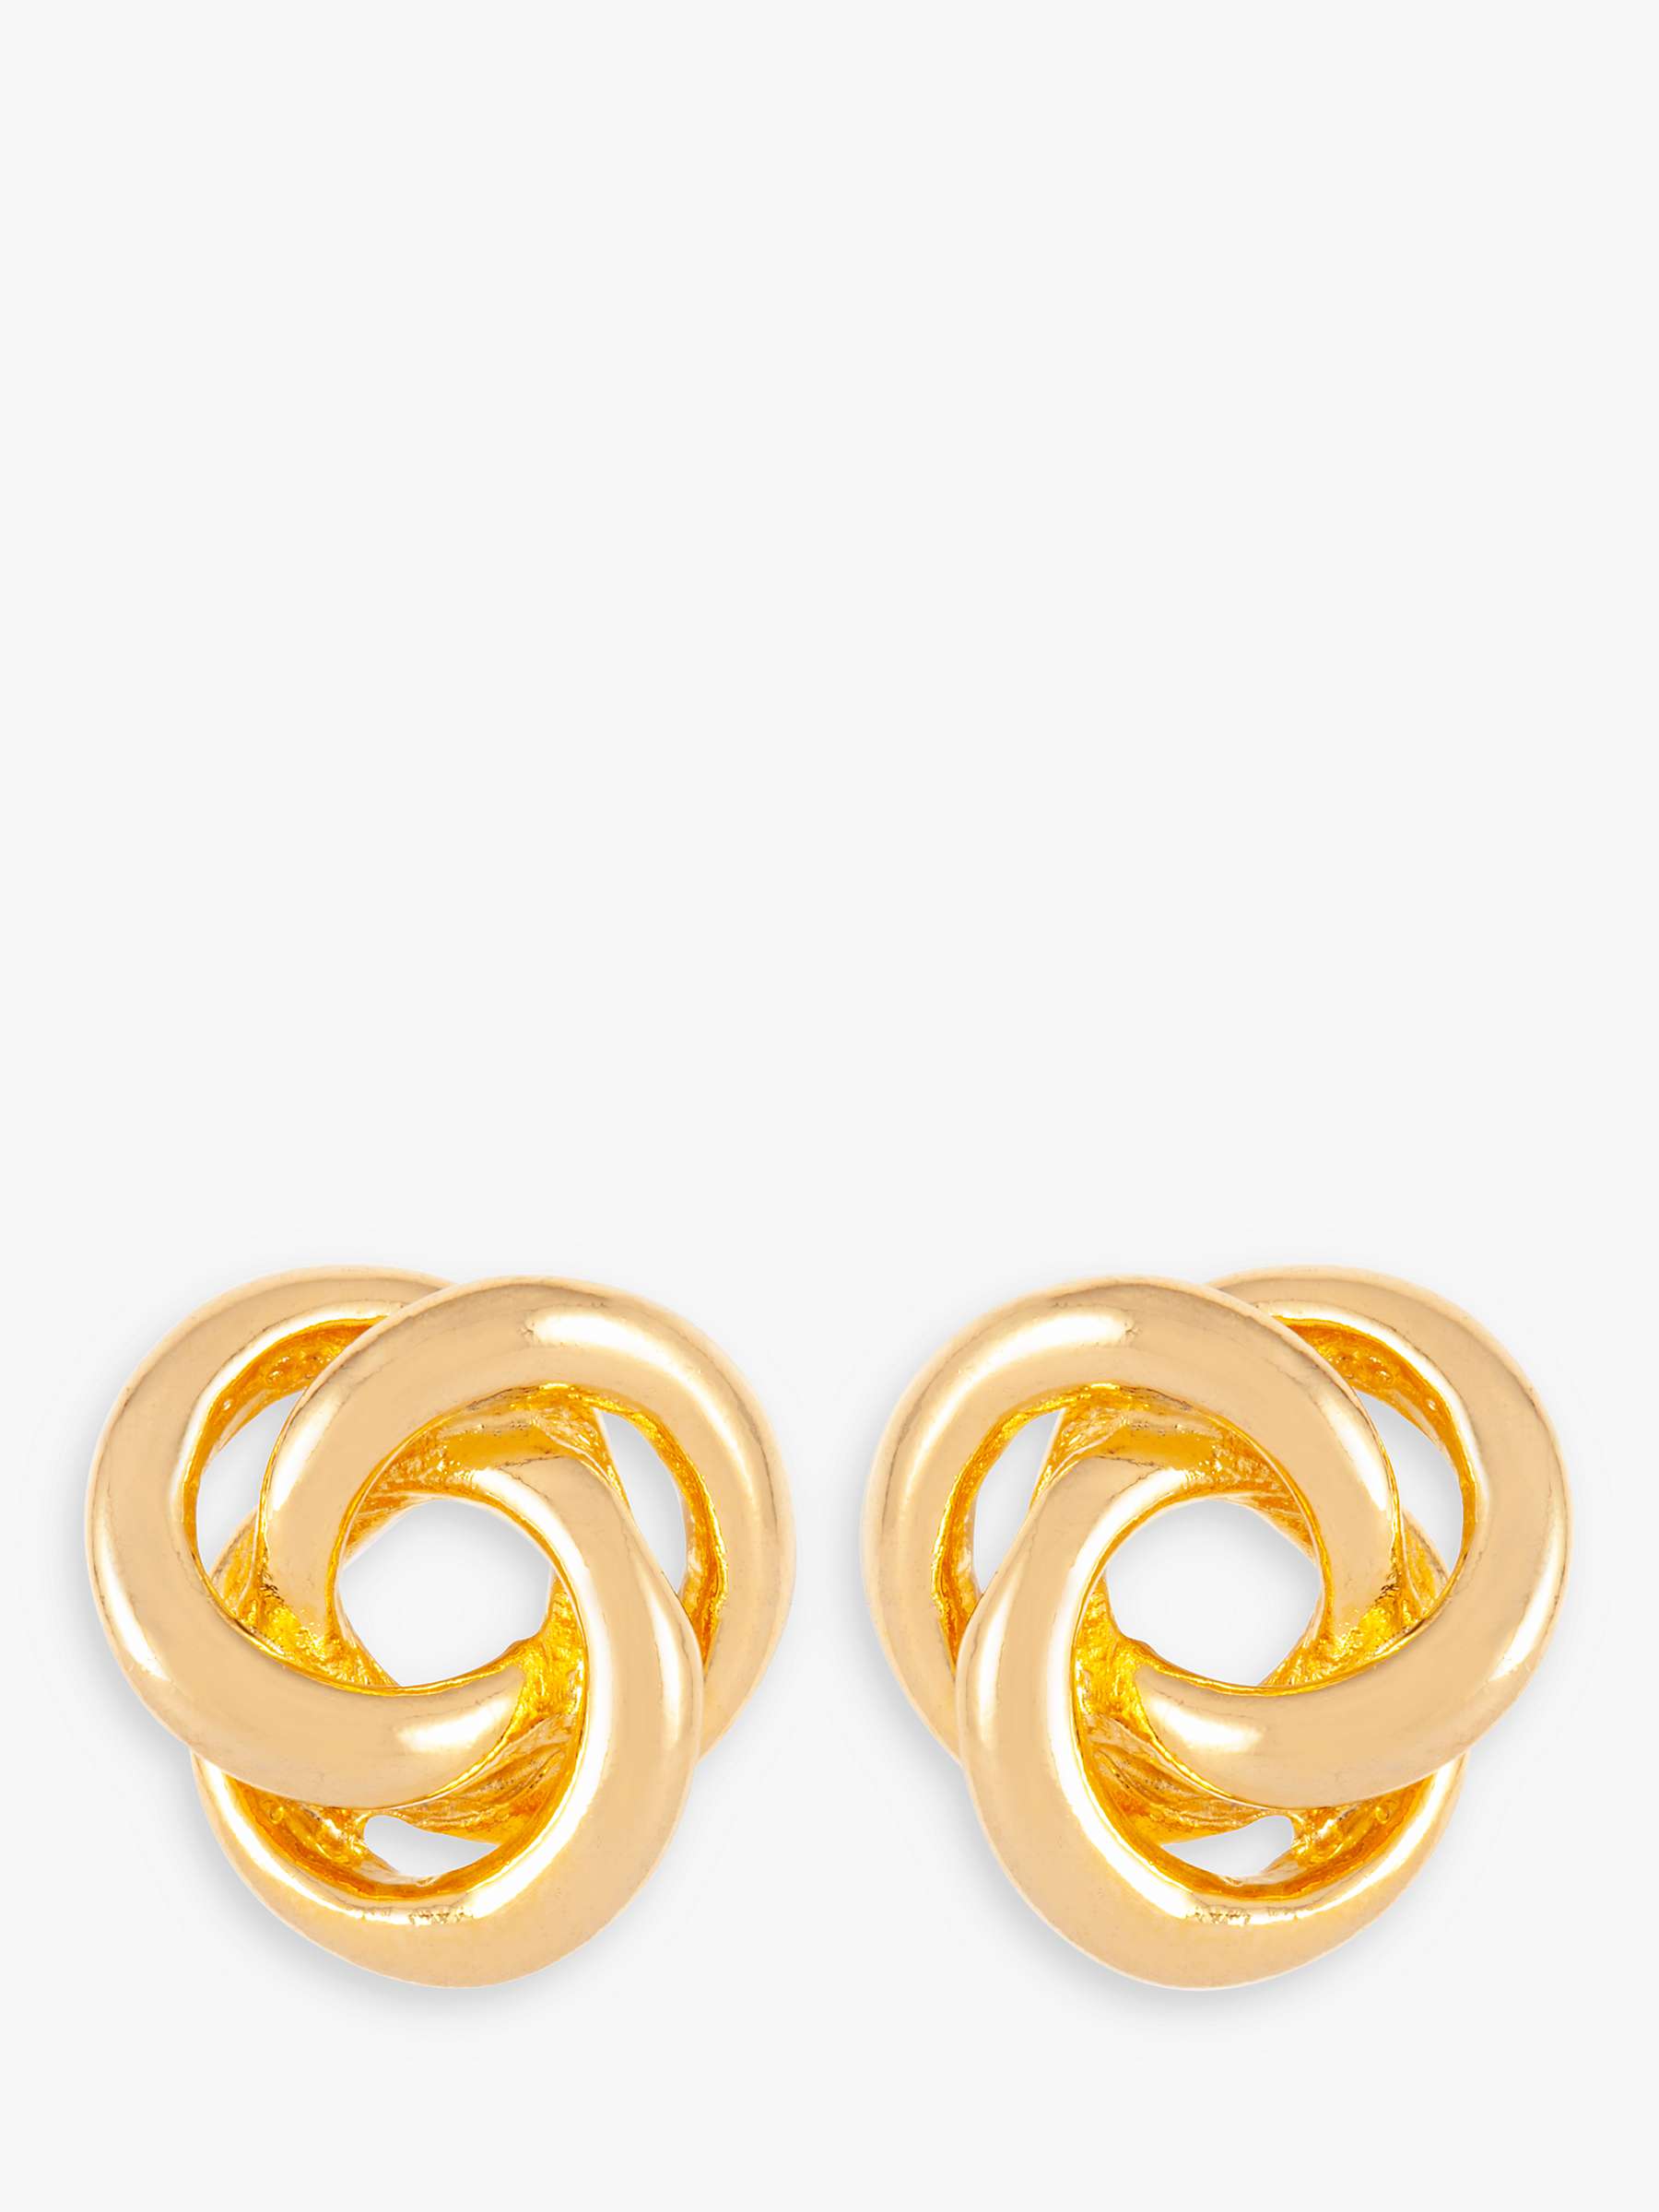 Buy Susan Caplan Vintage Gold Plated Knot Stud Earrings, Dated Circa 1990s, Gold Online at johnlewis.com